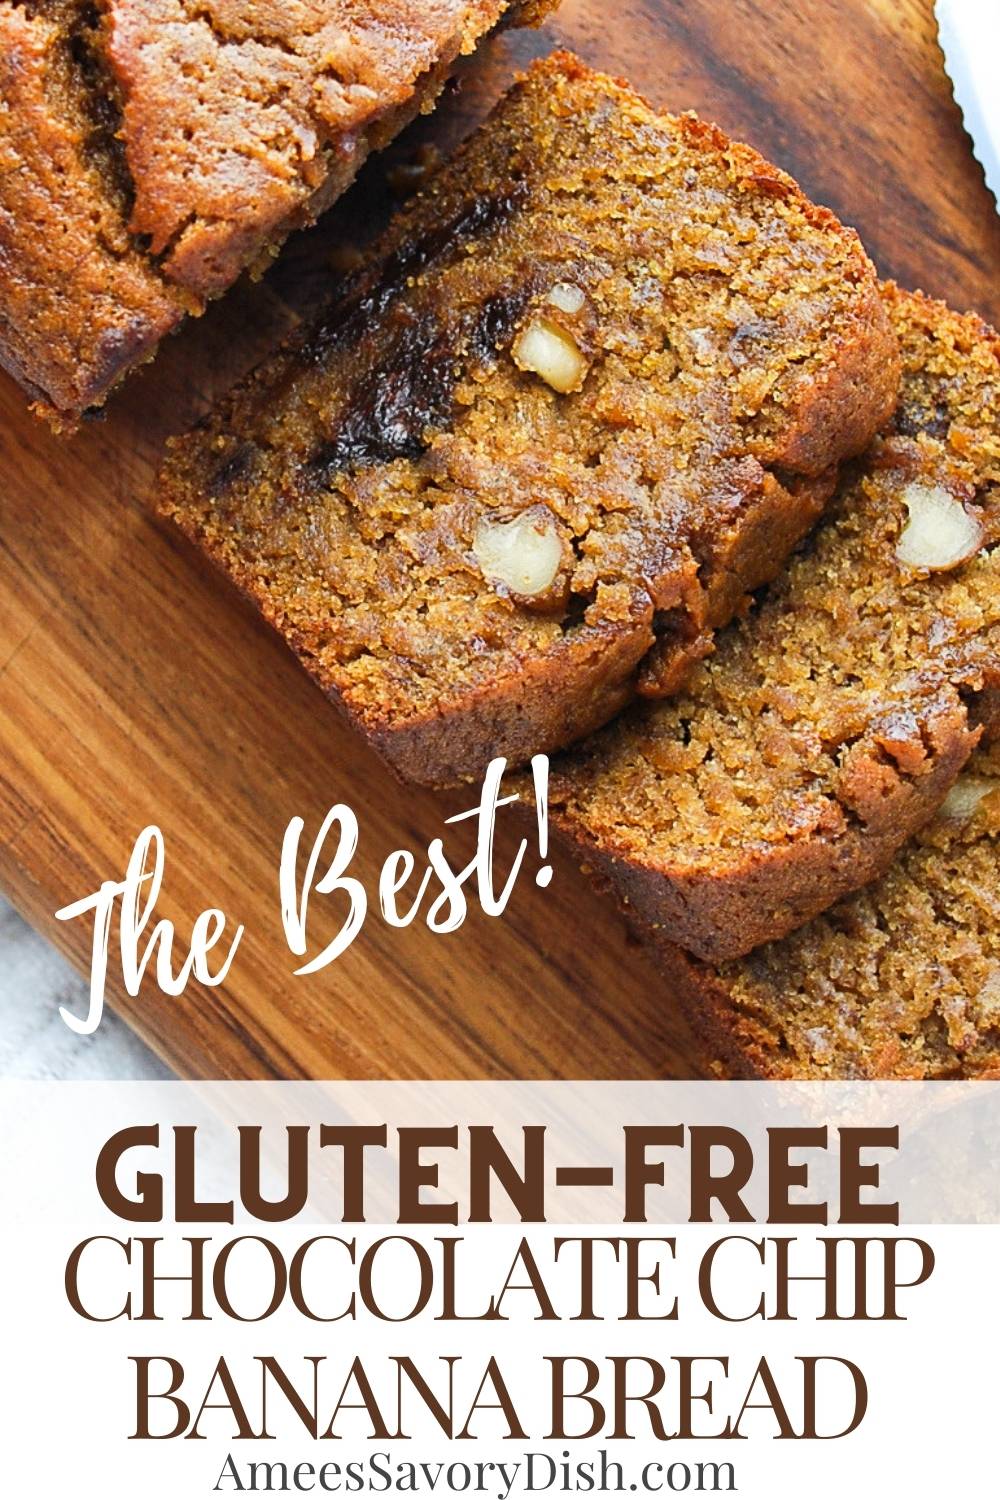 Make the BEST Gluten-Free Chocolate Chip Banana Bread from scratch with a blend of gluten-free whole grain flour, sweet and creamy bananas, and decadent chocolate chips. via @Ameessavorydish